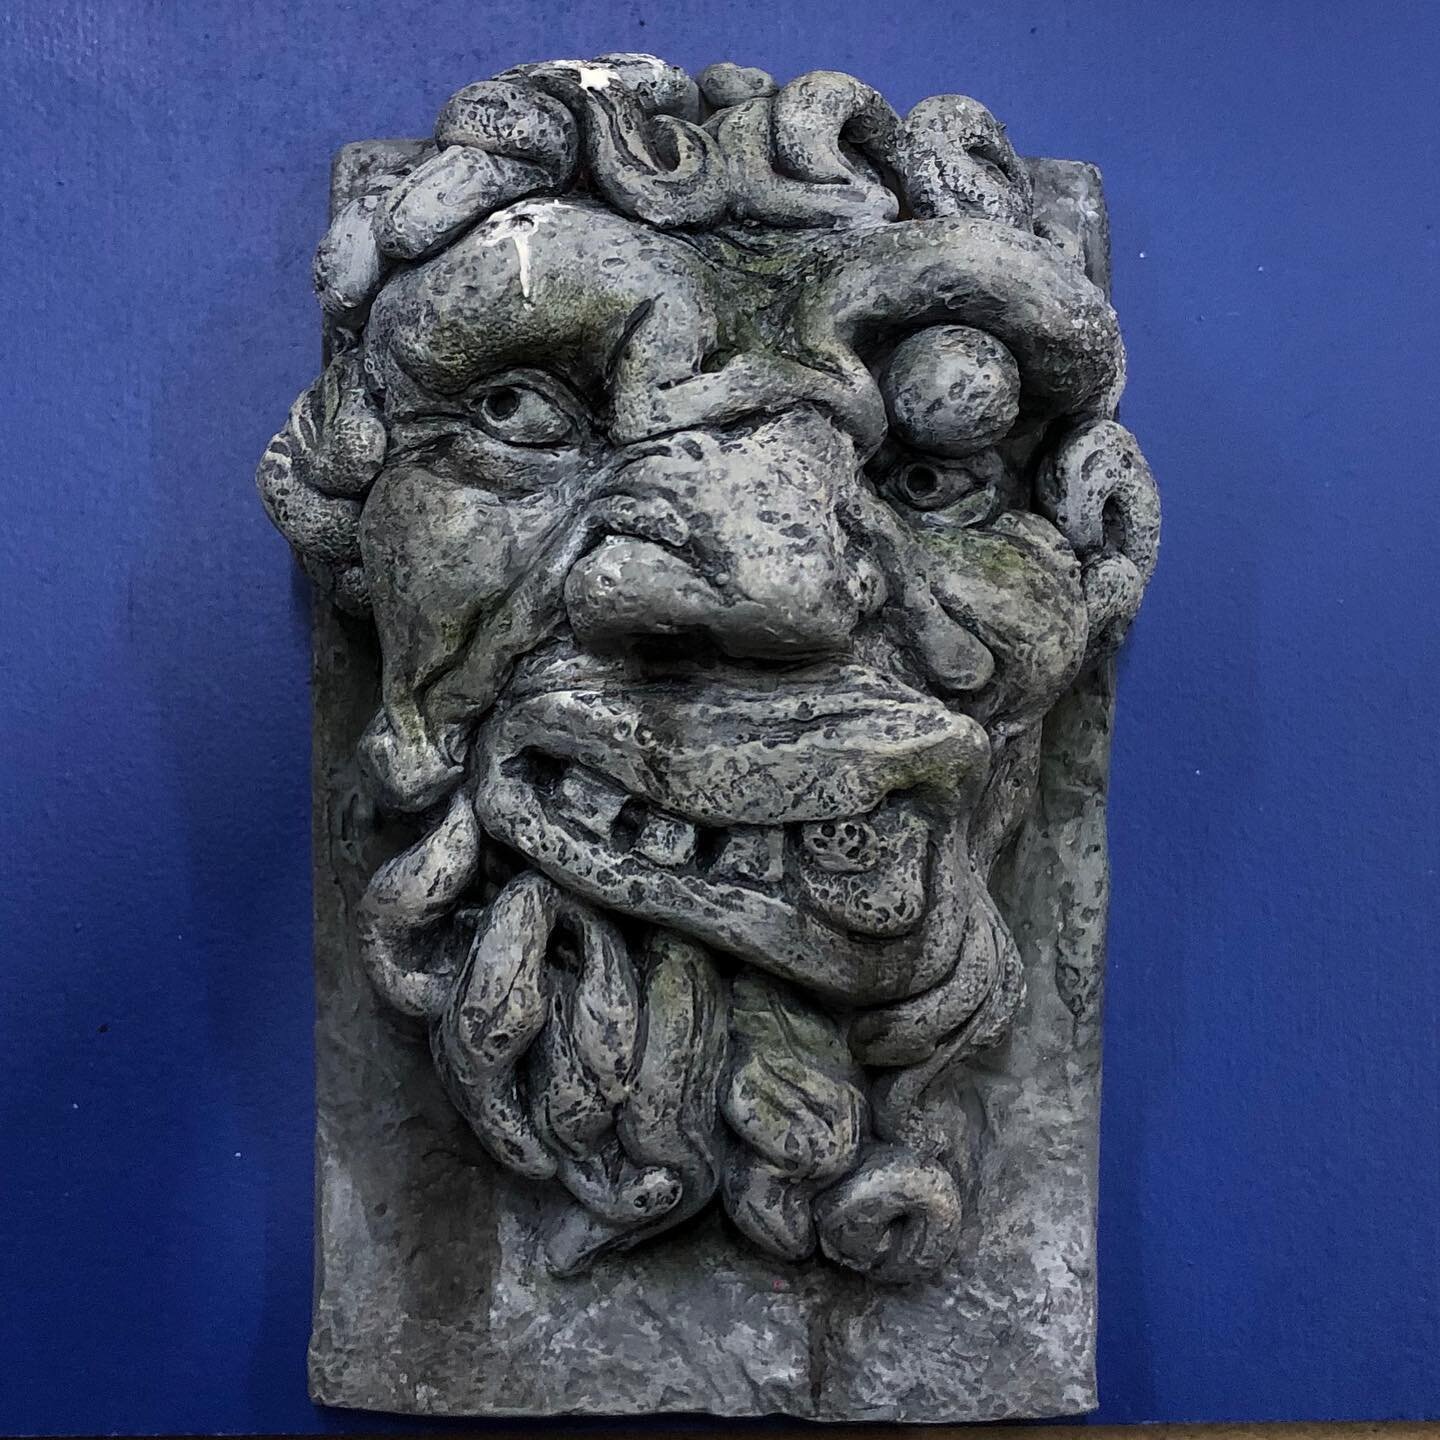 A gargoyle with a distinctly &lsquo;who farted&rsquo; look that I sculpted, molded, cast, then painted as part of the @nftsmodelmaking sculpting module. 

80 x 45mm

#nftsmodelmaking #miniature #nfts